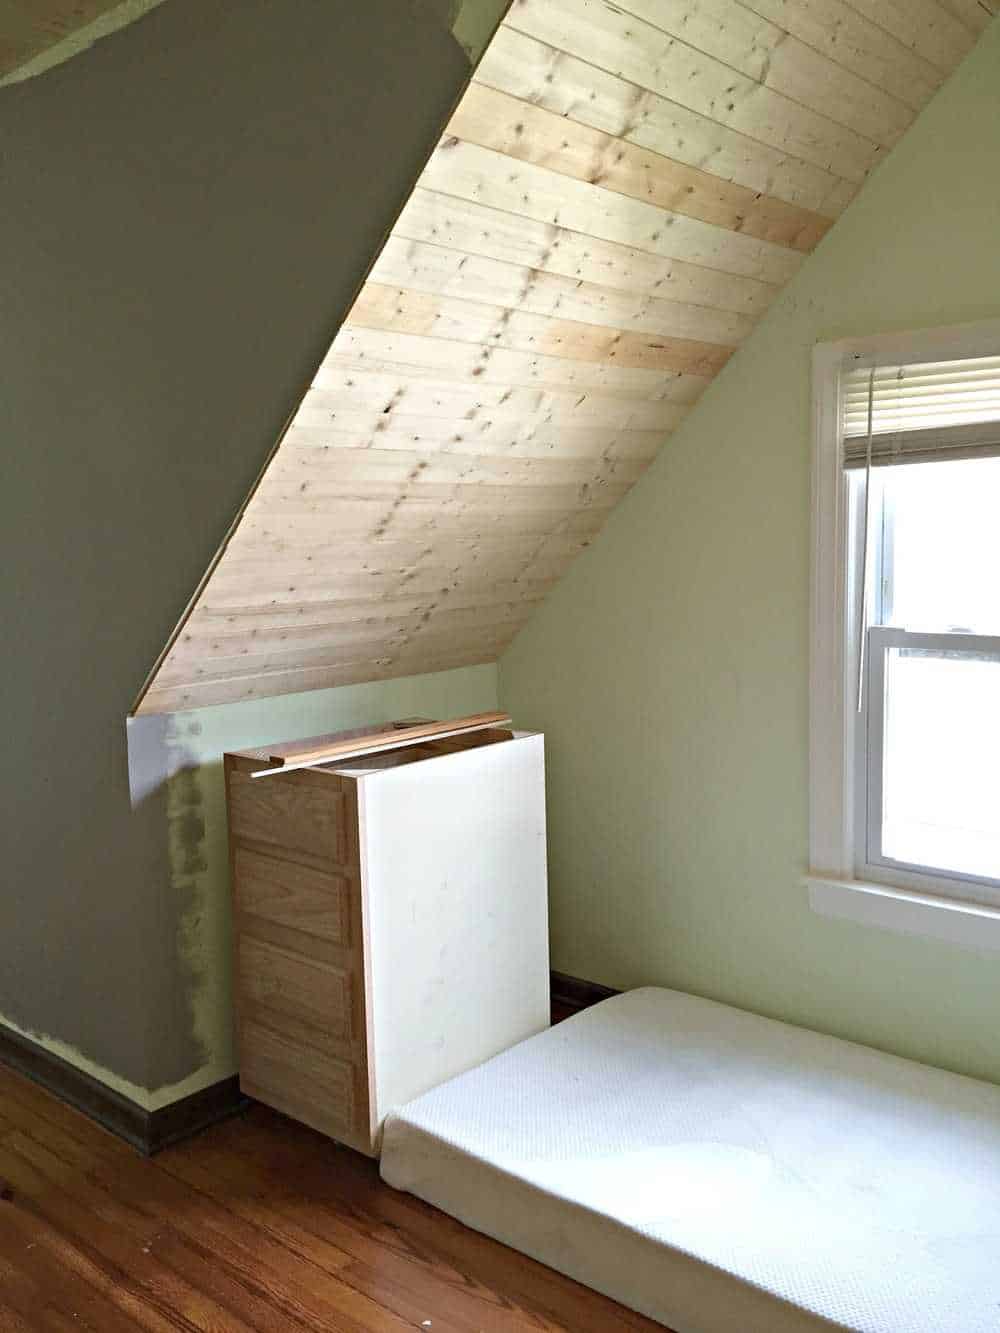 covering-popcorn-ceilings-in-the-attic-bedroom